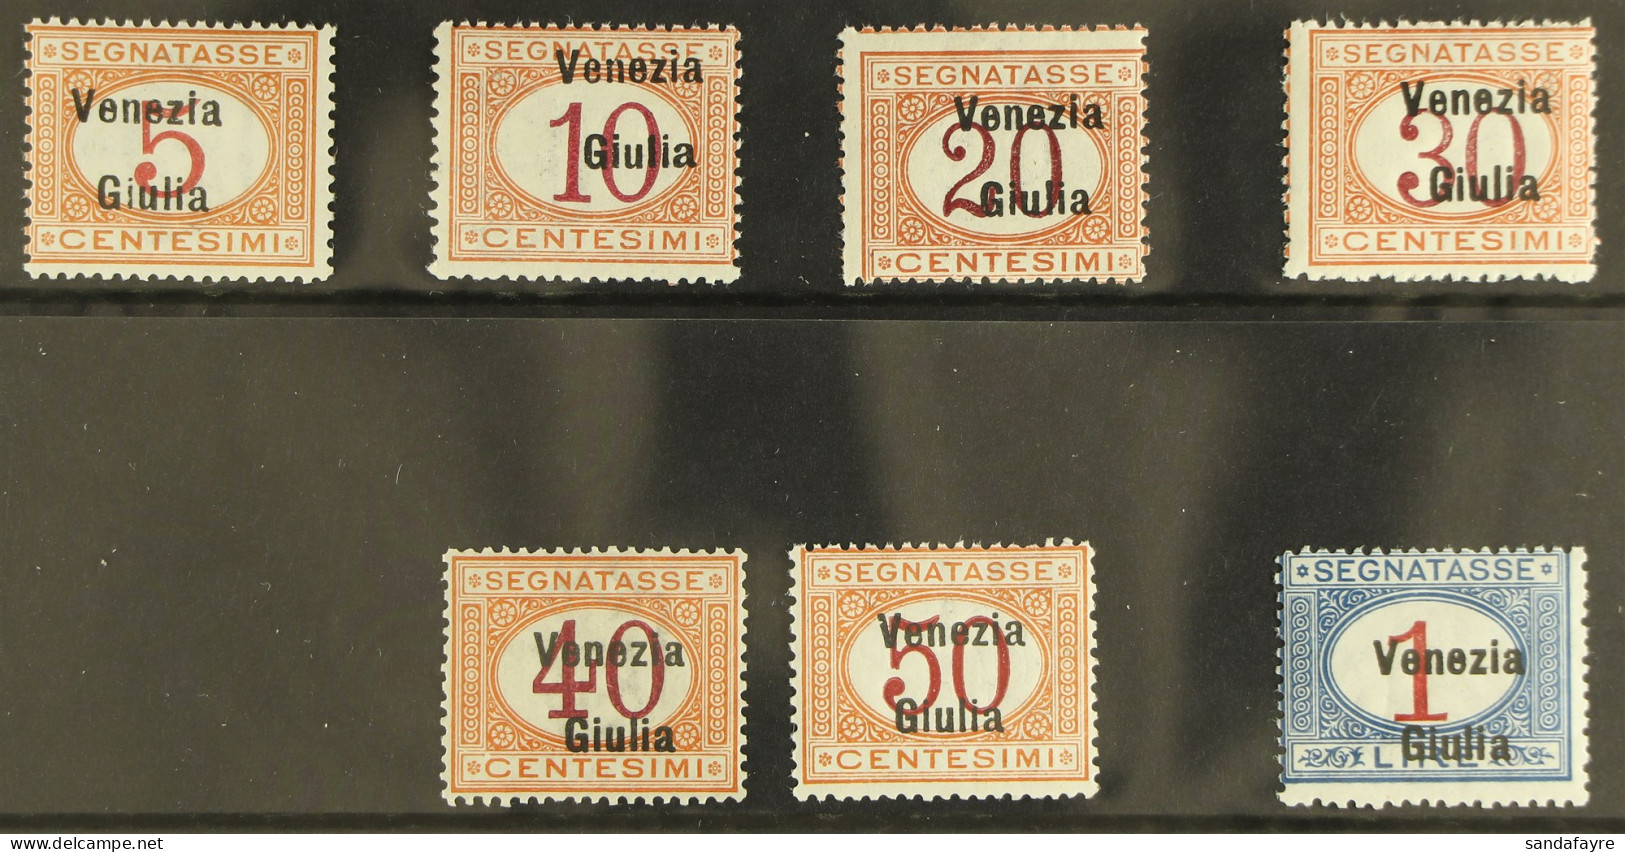 VENEZIA GIULIA Postage Due 1918 Complete Set, Sassone S4, Never Hinged Mint. Cat. ??2500 (7 Stamps) - Unclassified